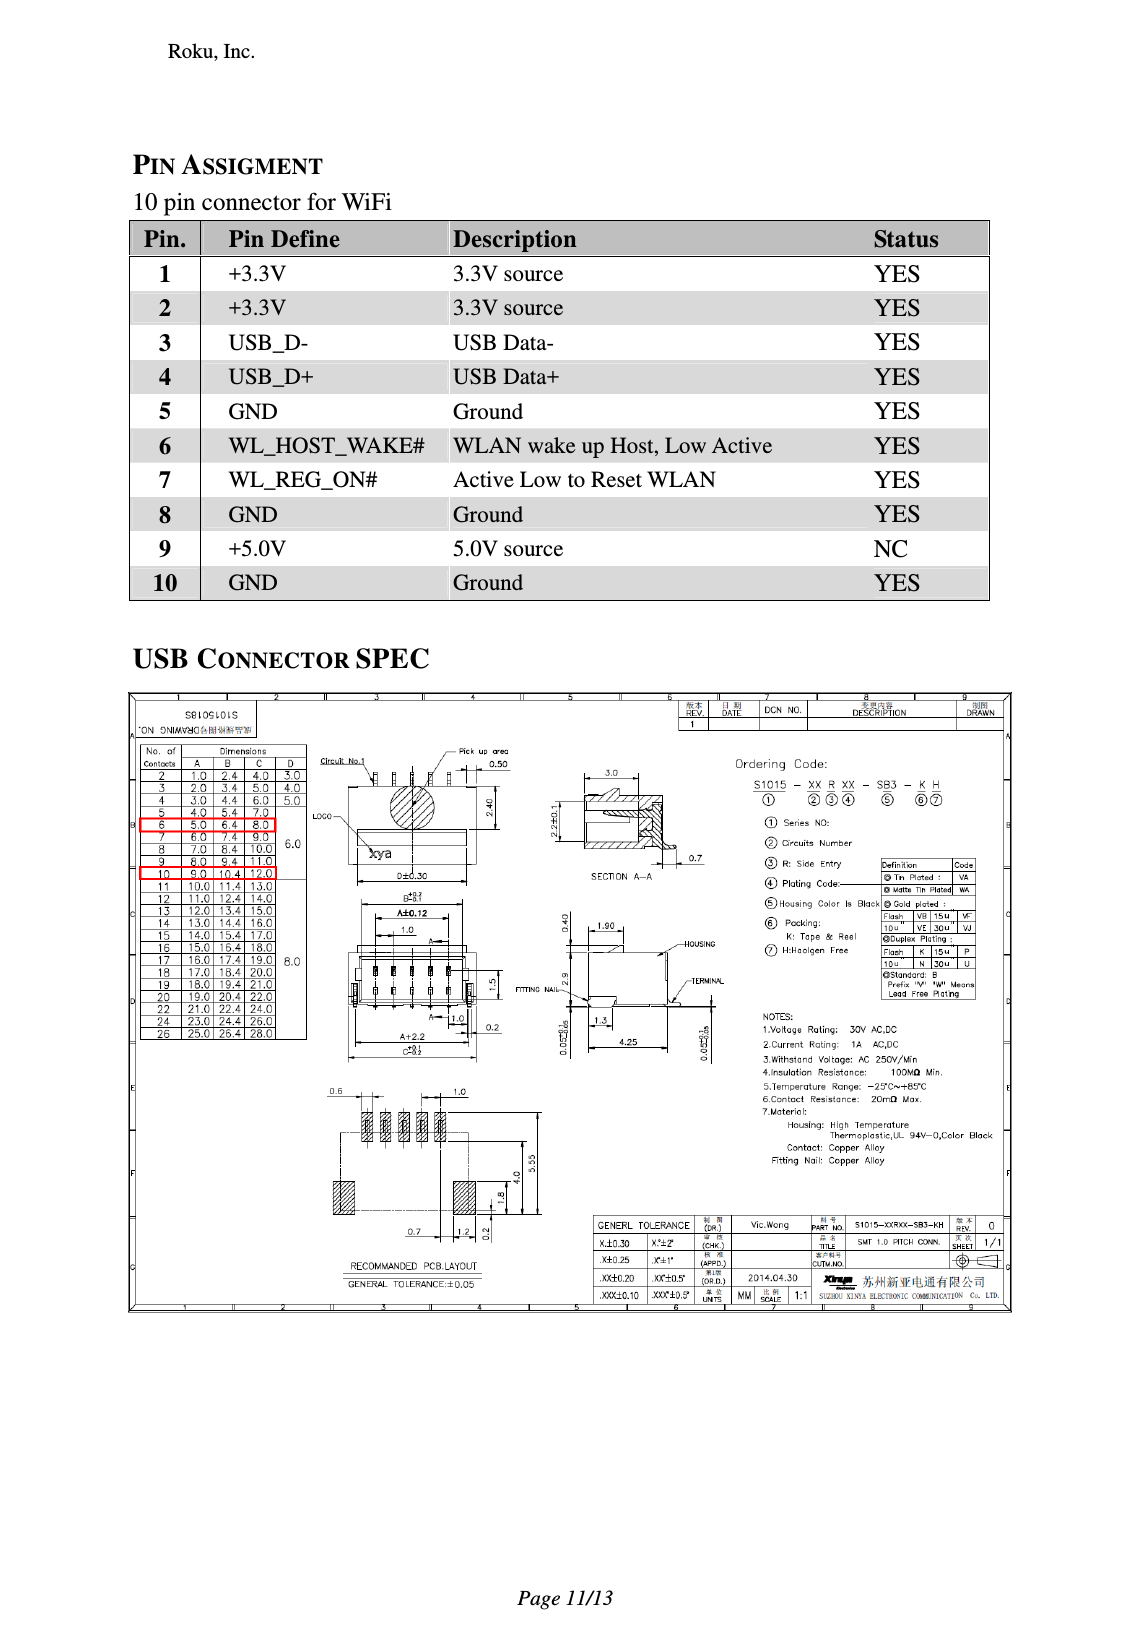 Roku, Inc. Page 11/13    PIN ASSIGMENT 10 pin connector for WiFi Pin.  Pin Define  Description  Status 1  +3.3V 3.3V source  YES 2  +3.3V  3.3V source  YES 3  USB_D- USB Data-  YES 4  USB_D+  USB Data+  YES 5  GND  Ground  YES 6  WL_HOST_WAKE#  WLAN wake up Host, Low Active  YES 7  WL_REG_ON#  Active Low to Reset WLAN  YES 8  GND  Ground  YES 9  +5.0V 5.0V source  NC 10  GND  Ground  YES  USB CONNECTOR SPEC    